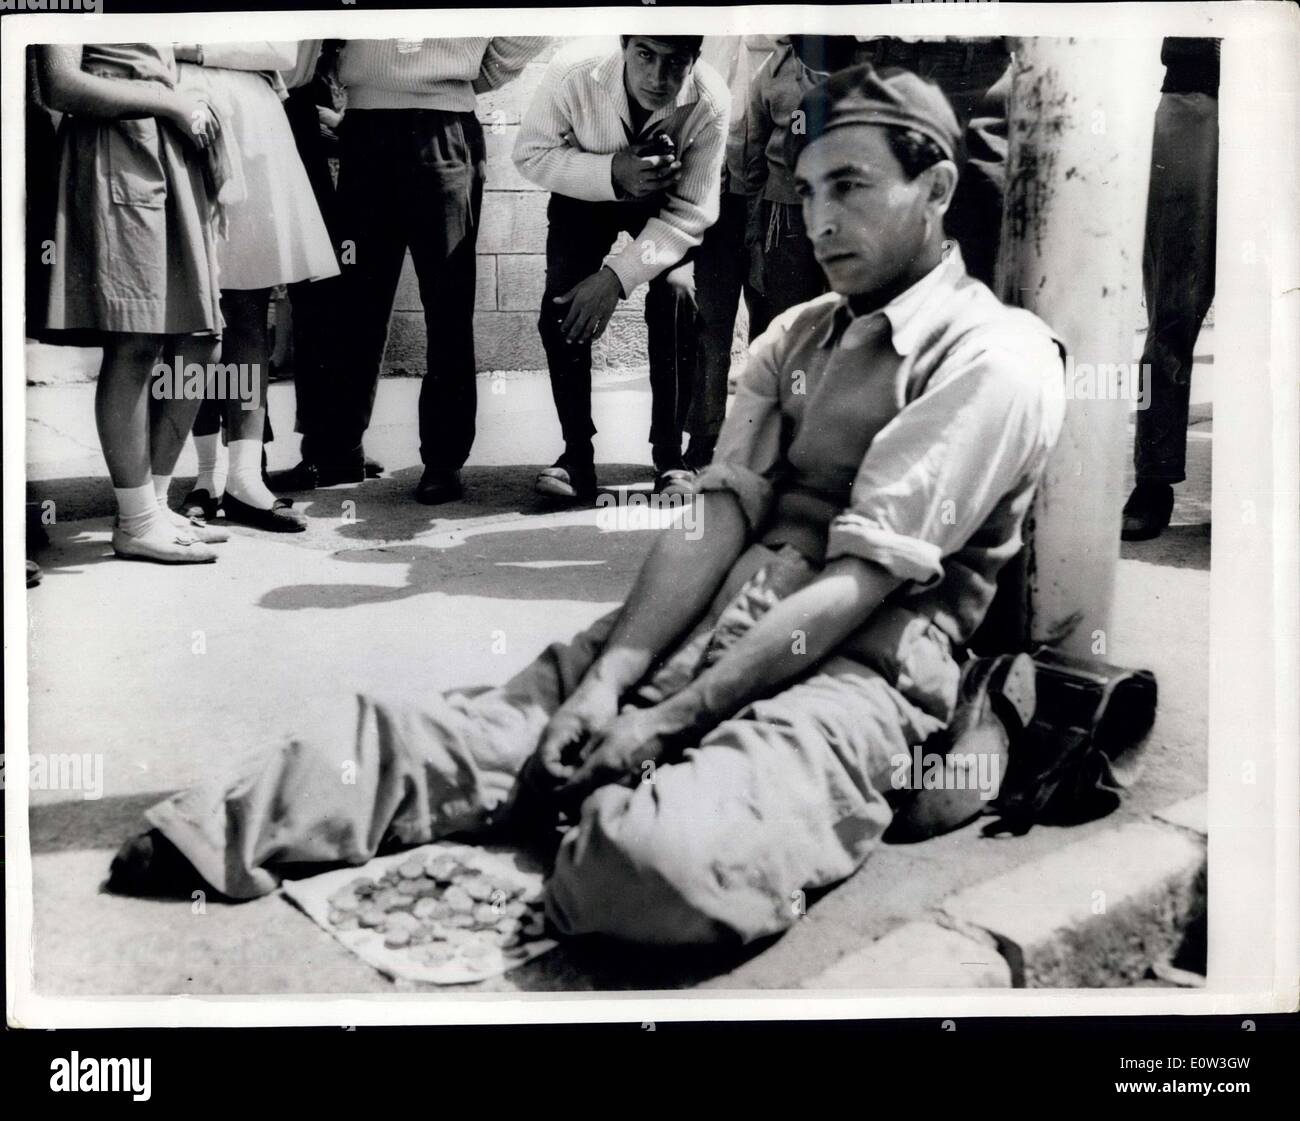 May 31, 1961 - The Eichamann Trial Continues In Jerusalem. Concentration Camp Victim - Outside The Courtroom: The trial of Adolf Eichmann - former Nazi Leader - accused of the mass murder of millions of Jews in wartime concentration camps - continues at Jerusalem. Photo shows A young man in Jerusalem - sits near the Eichamann trial court building - exposing his feet which were crushed in escape from a concentration camp. ''Trying Eichmann wont bring back my broken feet'' says the victim. Stock Photo